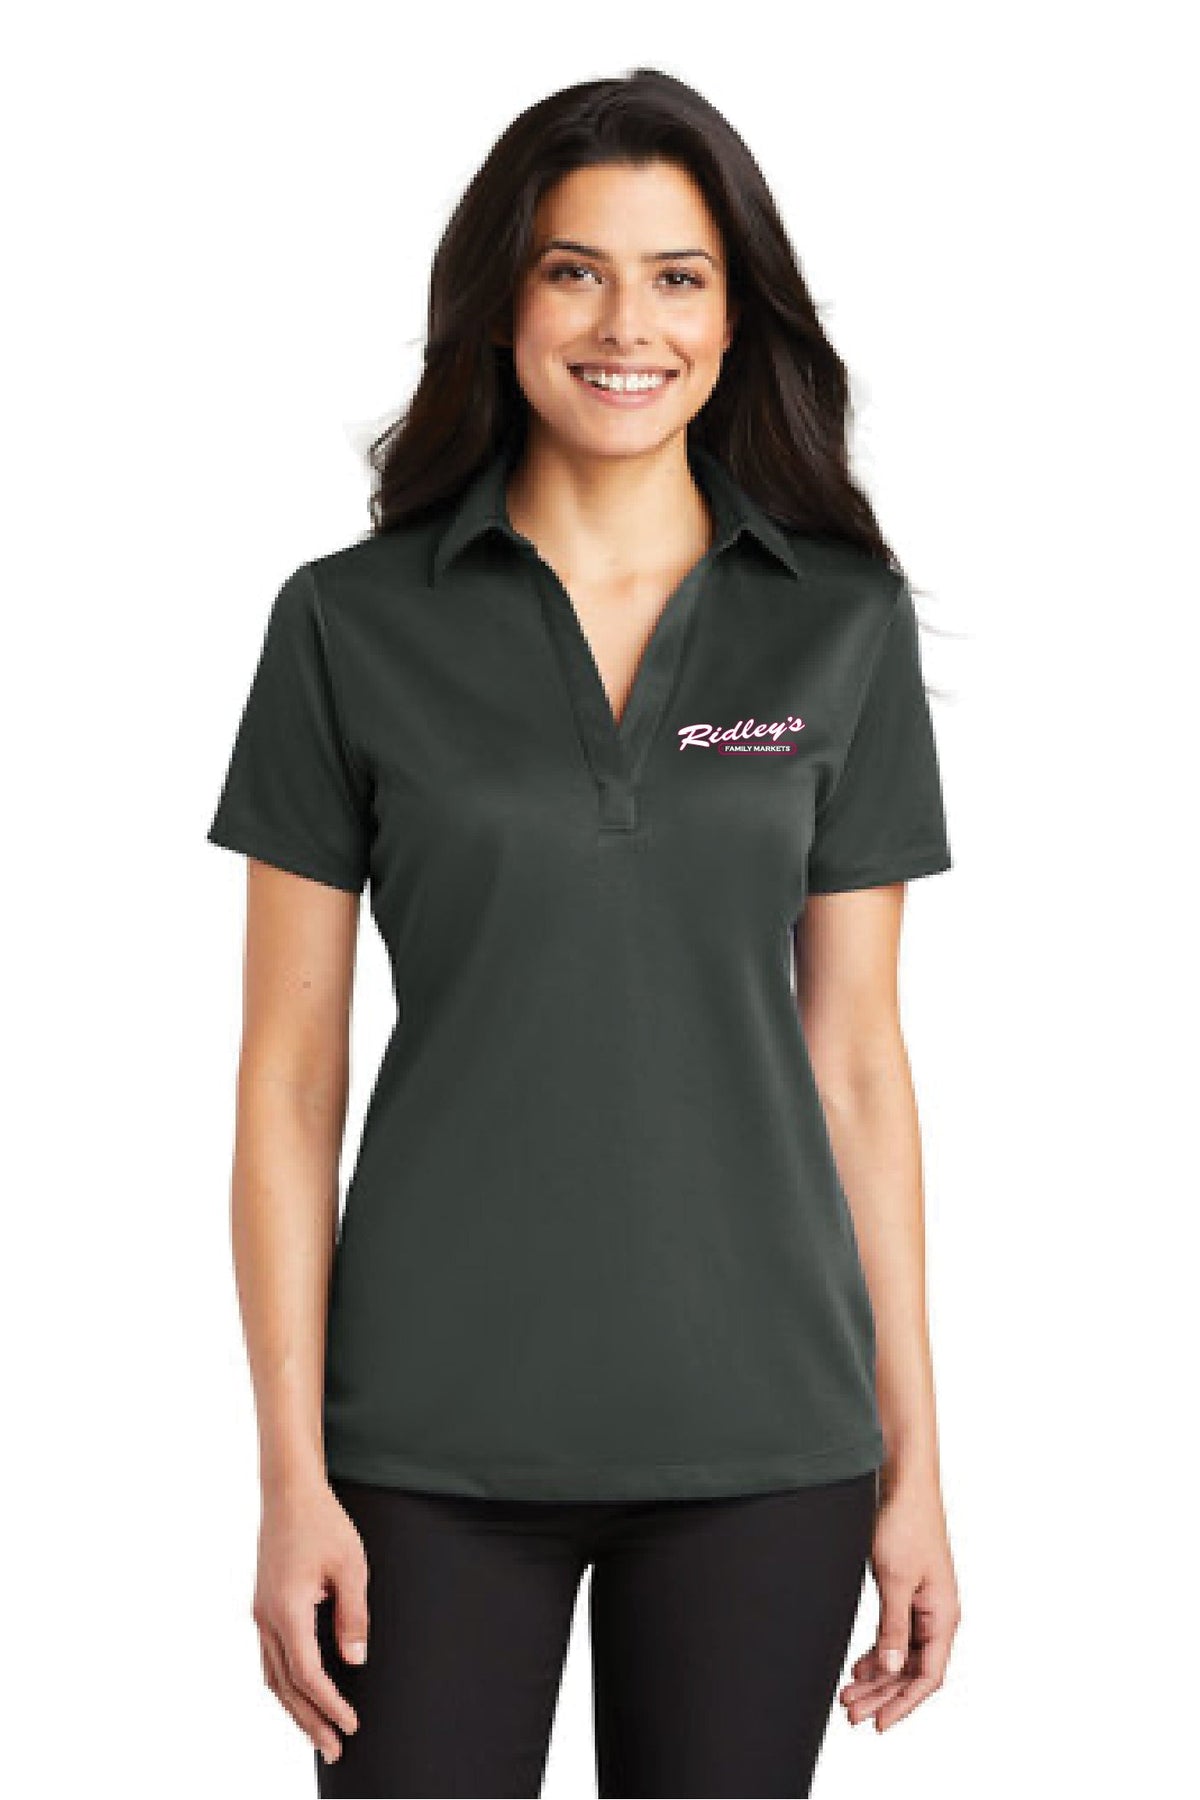 Ridley&#39;s - L540 Ladies Silk Touch Performance Polo